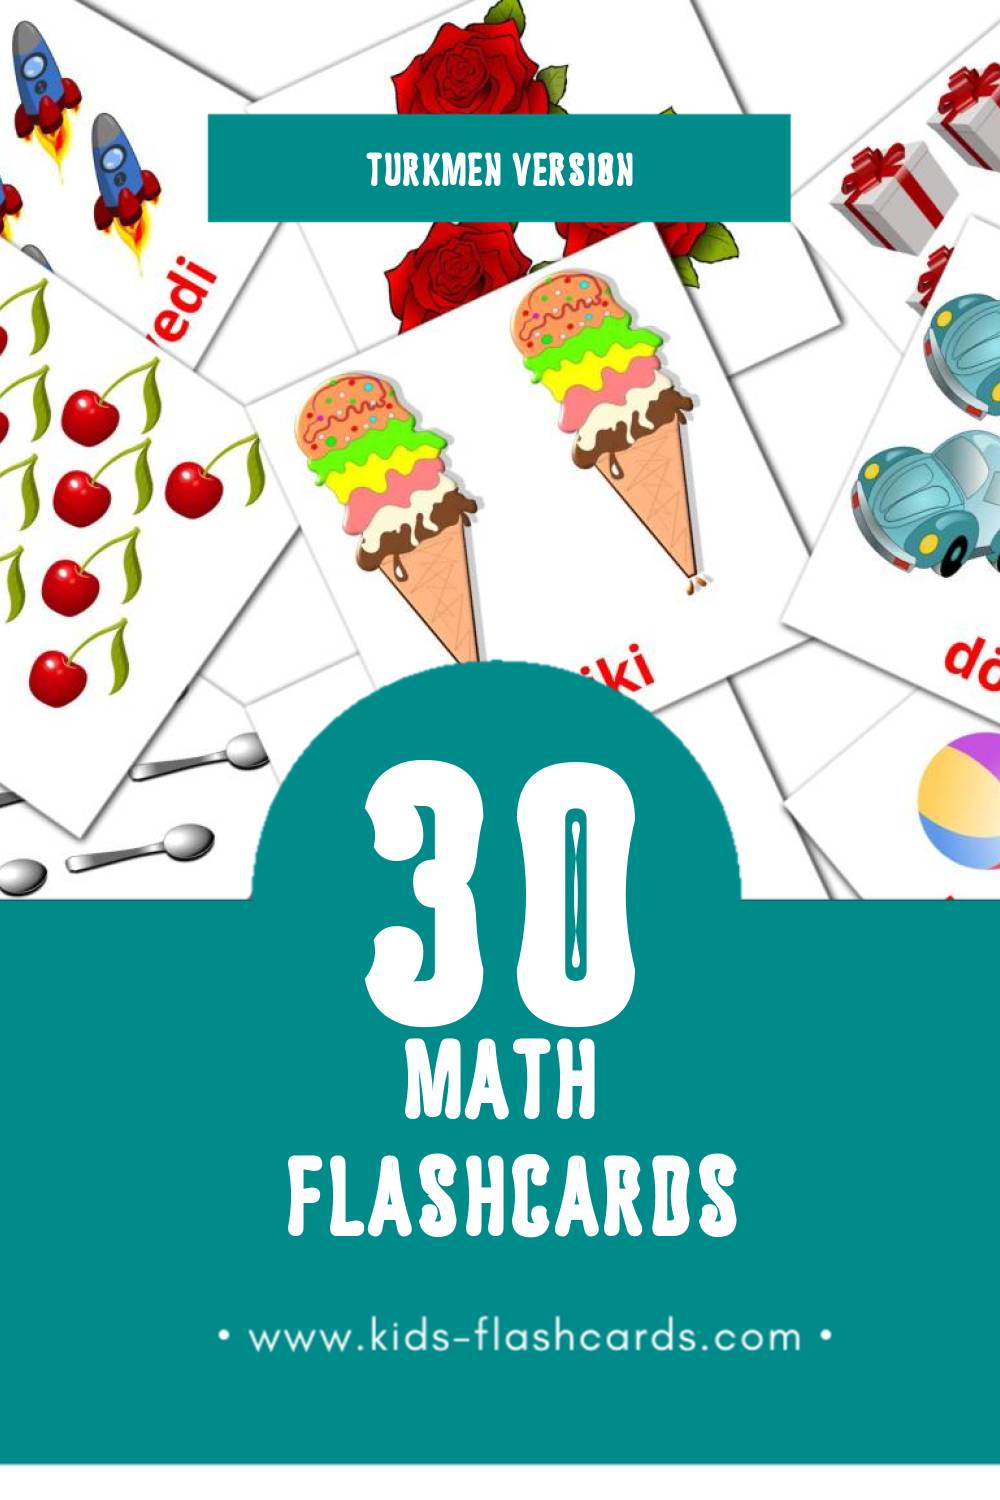 Visual Matematika Flashcards for Toddlers (10 cards in Turkmen)